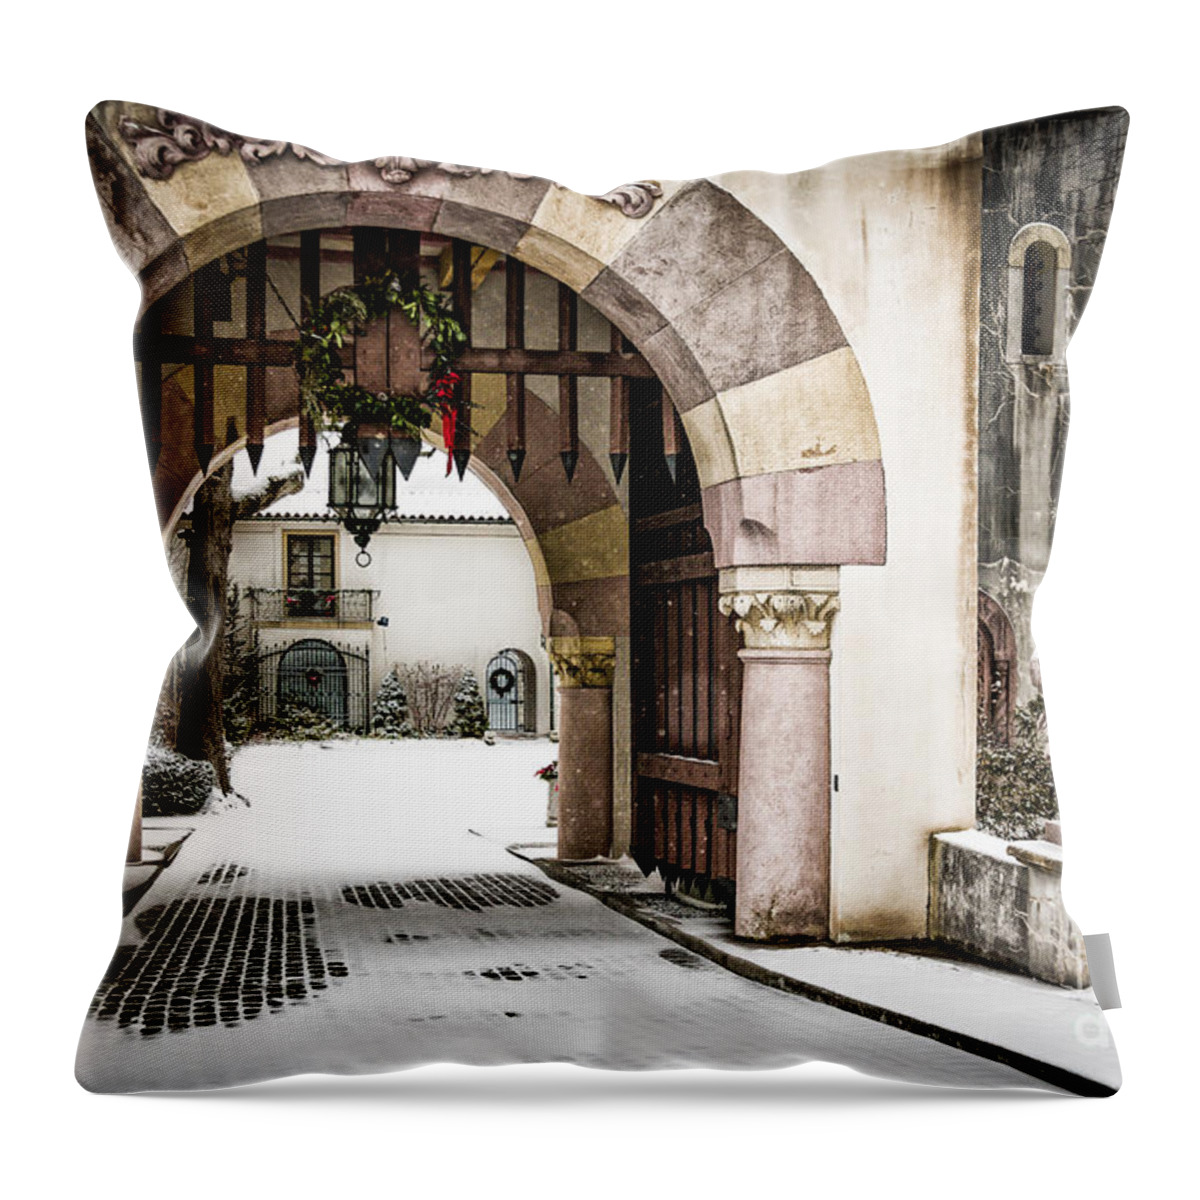 Snow Throw Pillow featuring the photograph Vanderbilt Holiday by Alissa Beth Photography